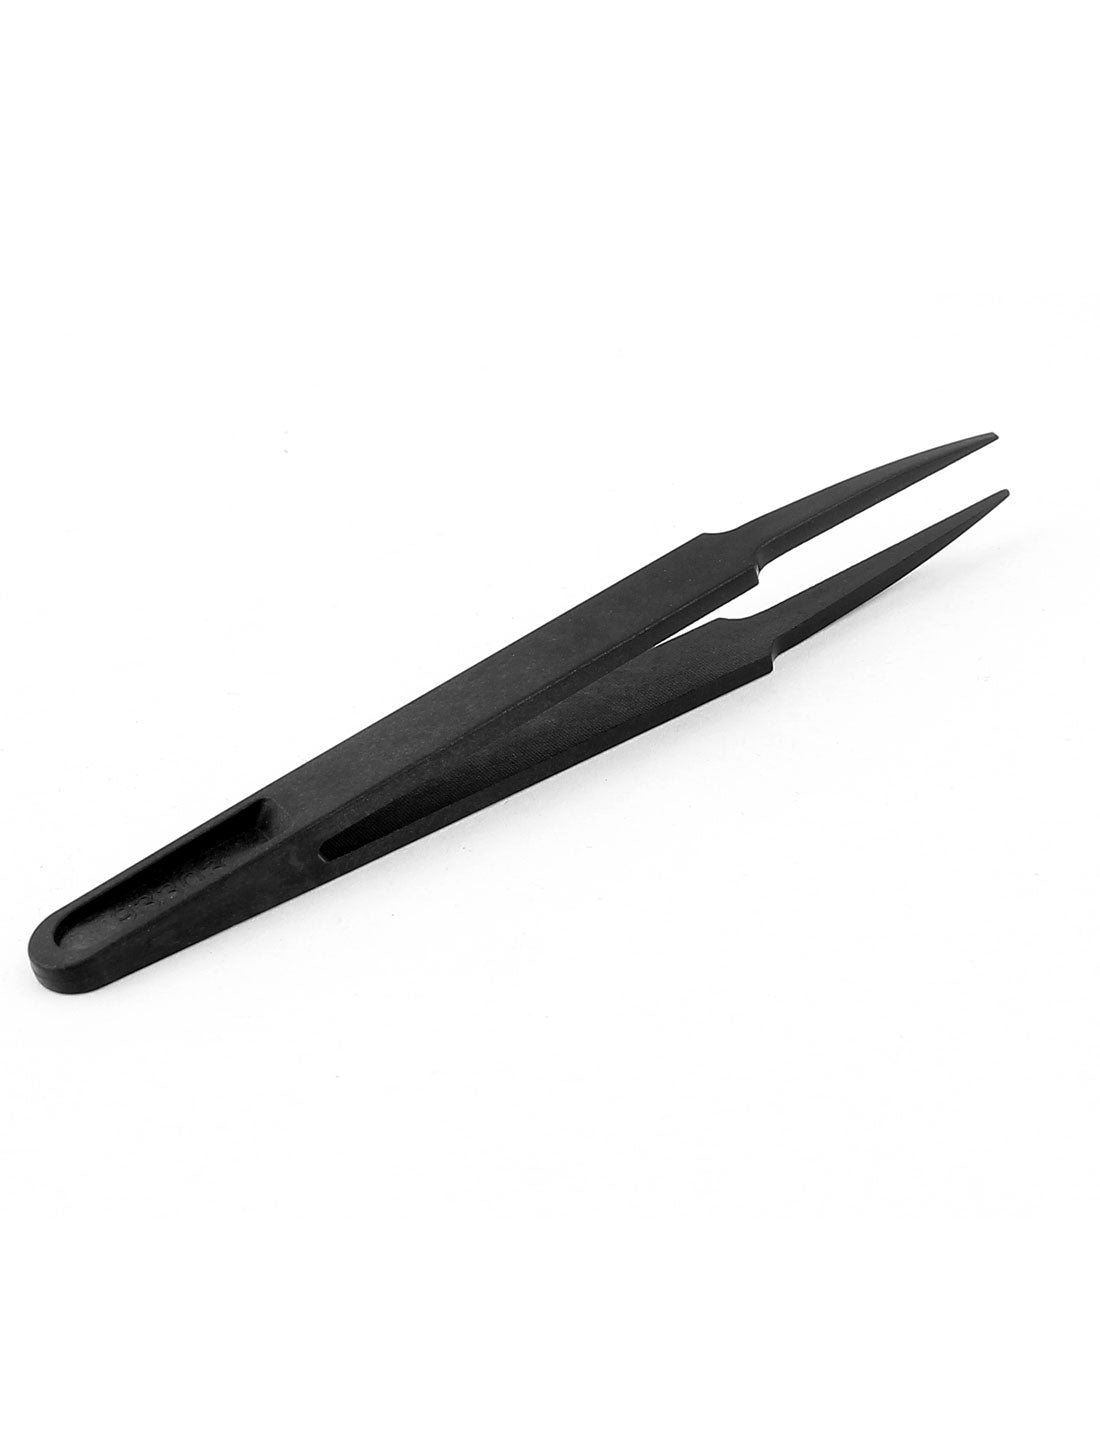 uxcell Uxcell Watchmakers Jewelers Bamboo Anti Static Pointed Tip Straight Tweezer Plier Beading Repair Tool